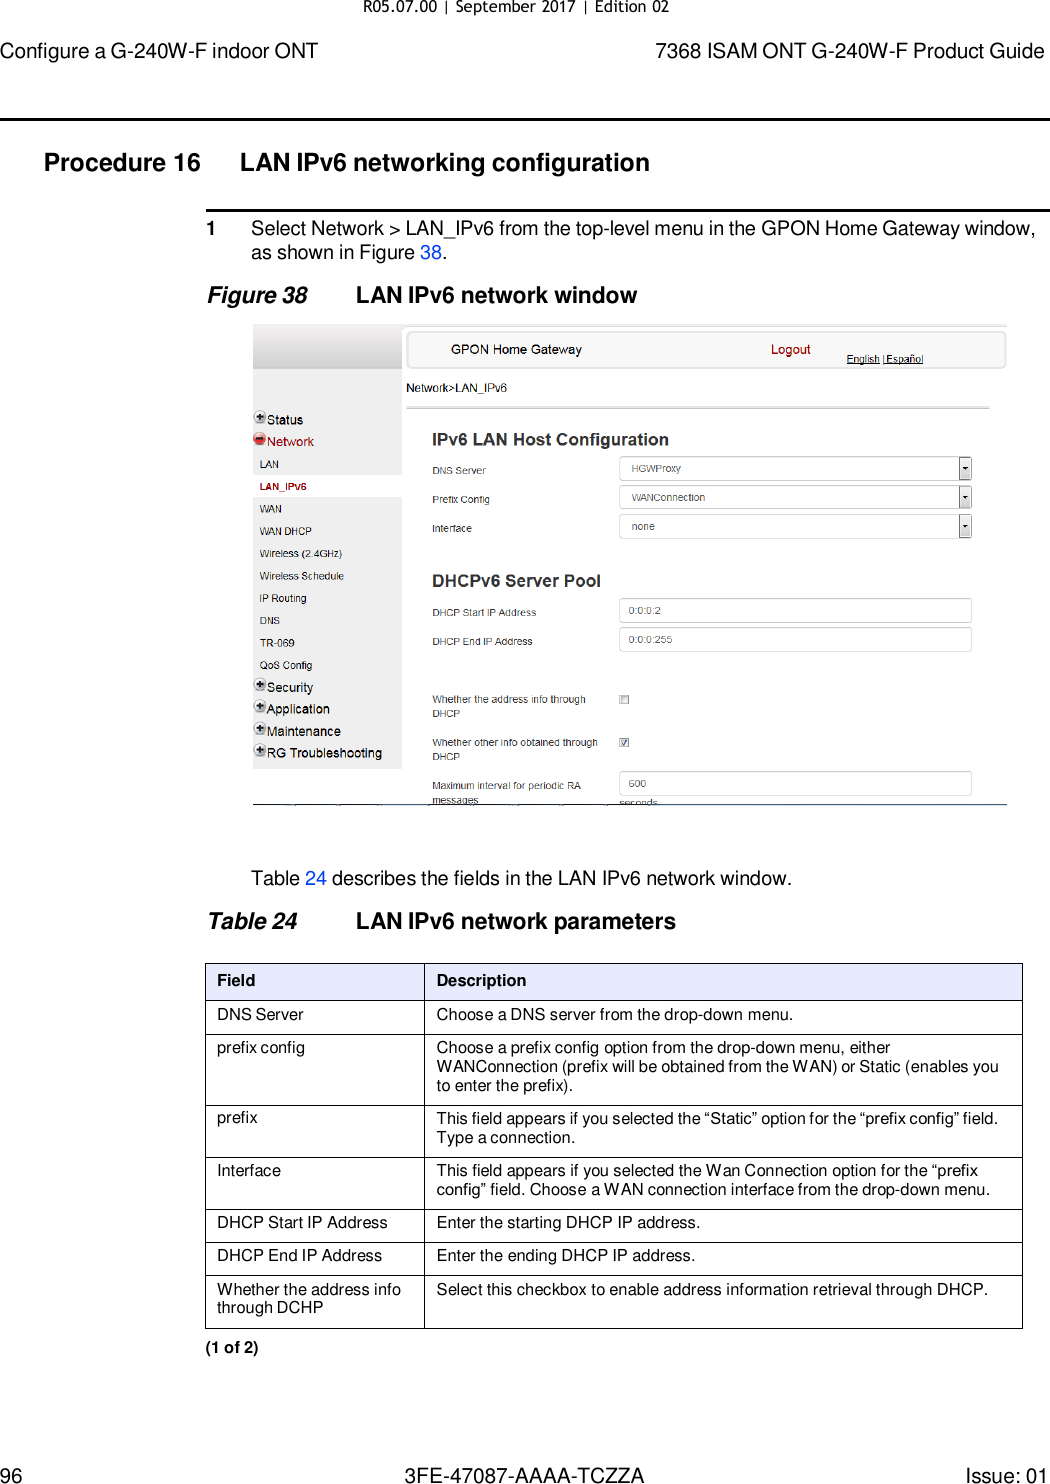 Page 90 of Nokia Bell G240WFV2 7368 ISAM GPON ONU User Manual 7368 ISAM ONT G 240W F Product Guide